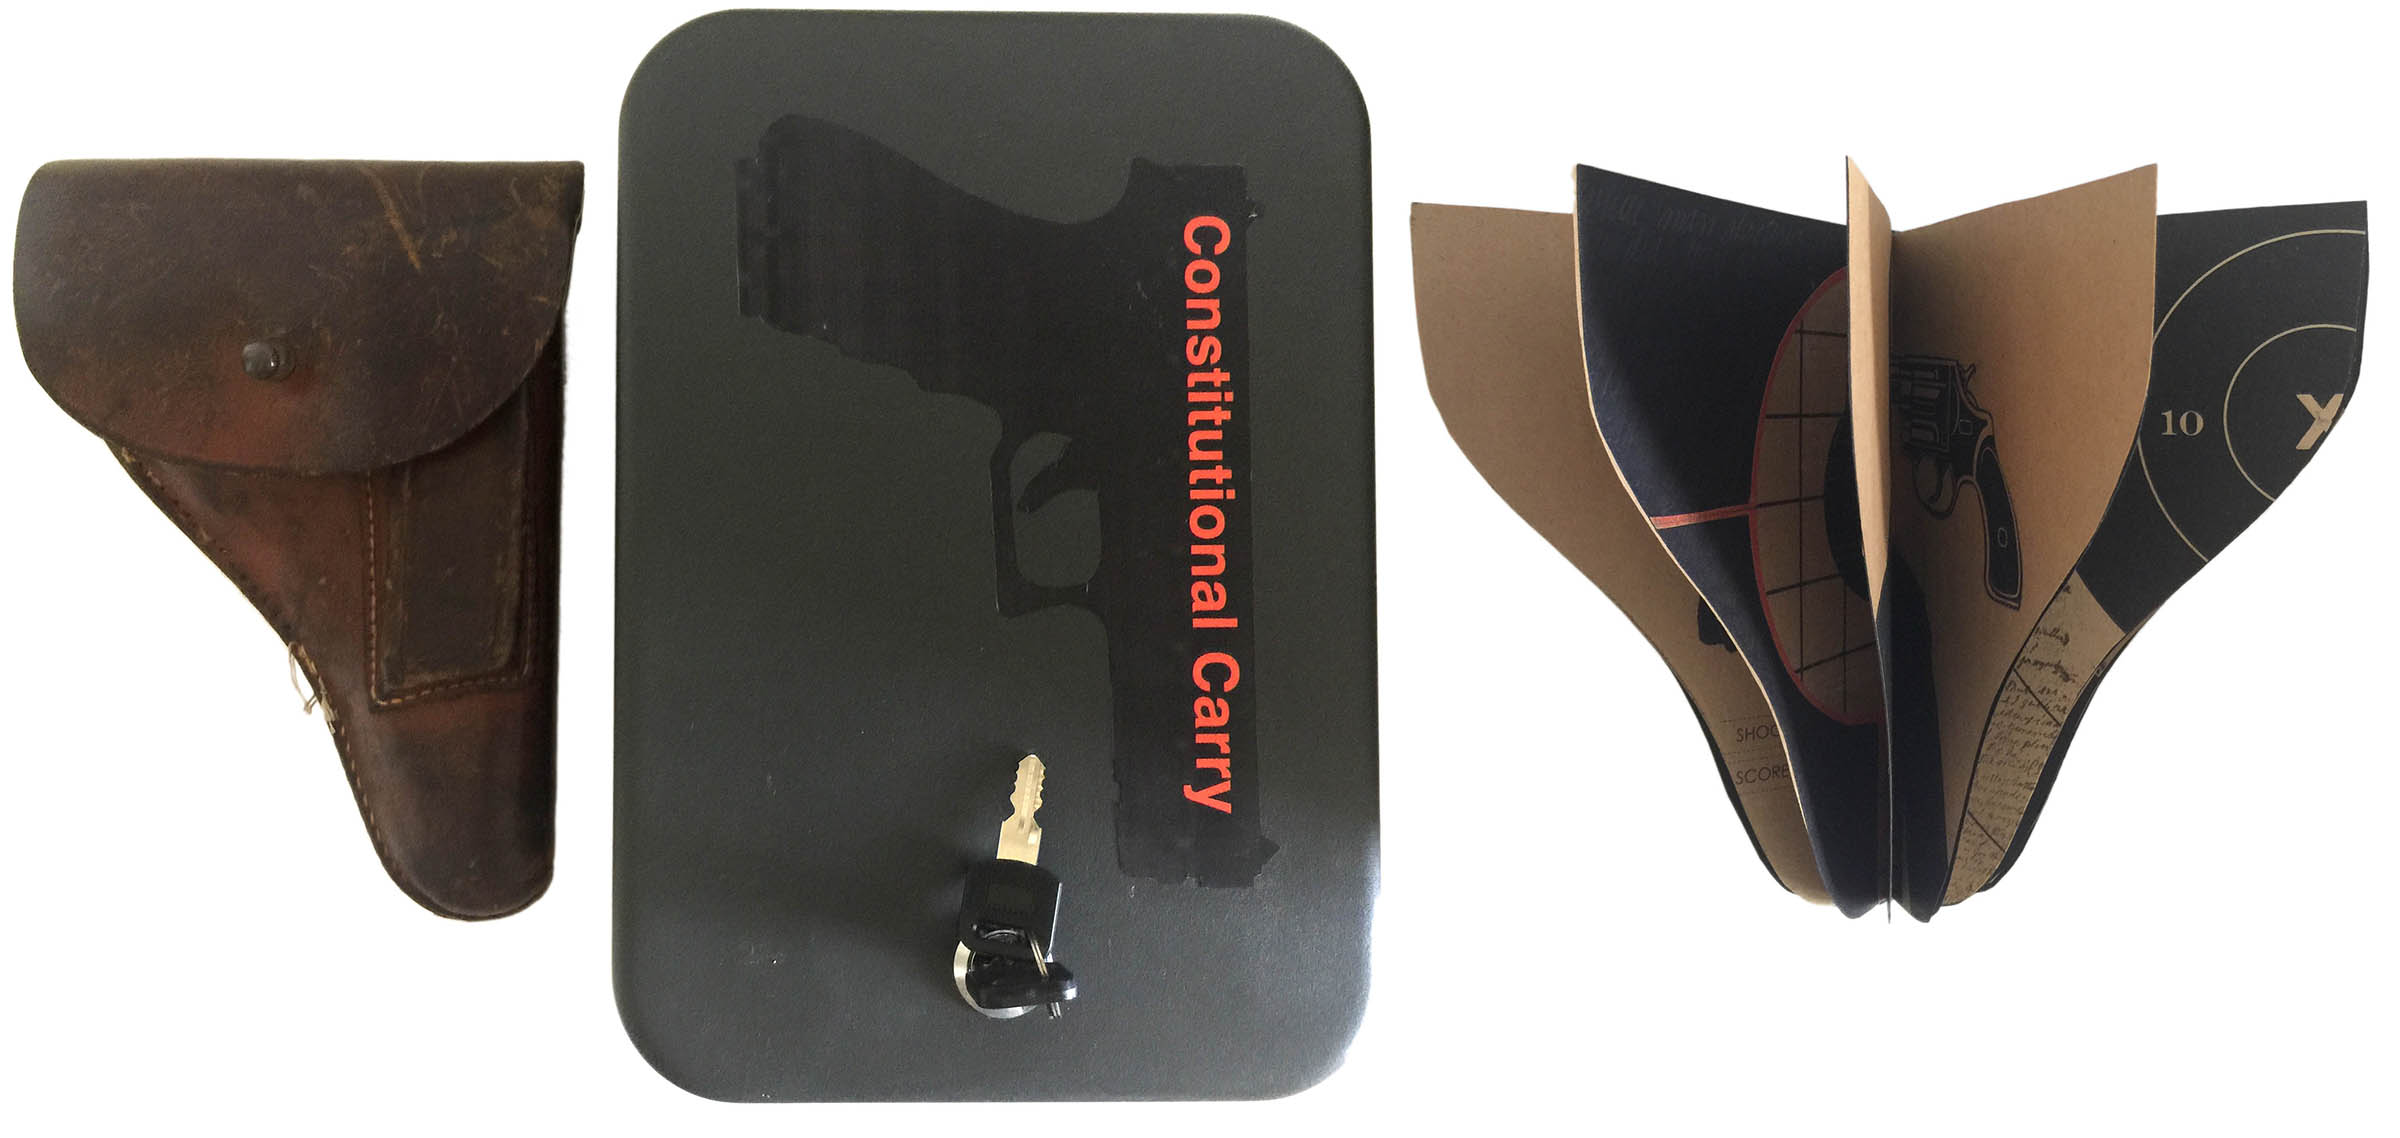 Constitutional Carry
“Constitutional Carry” is a gun-shaped book designed to fit into my father’s vintage police holster and be kept in a metal, locked gun safe. It is 7.25″ x 5″ with 20 pages incorporating the following text: The term constitutional carry, refers to the United States Constitution’s Second Amendment which gives citizens the right to bear arms, typically a handgun, openly or concealed, without a permit or license. All 50 states allow individuals to carry concealed weapons — 20 without a permit. Thirty-one states allow a handgun to be carried openly without a permit and an additional 15 allow open carry with a permit. Without a permit and background check, it is possible for convicted criminals, individuals with mental health issues, dishonorably discharged military personnel and non-US citizens to legally carry guns in public. The US is the only nation with more guns than people. In 2020, 17 million handguns were sold — 64% more than in the previous year, and about 1/5 to first-time buyers. One third of households in the US own guns and estimates suggest that 3-million adults carry loaded handguns every day. The US has a total rate of firearms death which is 50 to 100 times greater than that of many similarly wealthy nations with strict gun control laws, such as the United Kingdom. Although self-defense is often cited as the reason individuals need guns, a successful defense occurs in less than one percent of crimes. And while mass shootings have been covered extensively in the media, they account for a small fraction of gun-related deaths. More than one-third of the 100 Americans gun deaths each day are homicides and the remaining two-thirds are suicides. Gun violence in the US results in tens of thousands of deaths and injuries and costs taxpayers more than half a billion dollars in direct hospital costs annually. While there are efforts to control the proliferation of guns and the ensuing violence, more states are loosening restrictions to owning and carrying handguns. These competing issues are among the most widely debated and contentious in the US today and perhaps with the most potential for disaster.